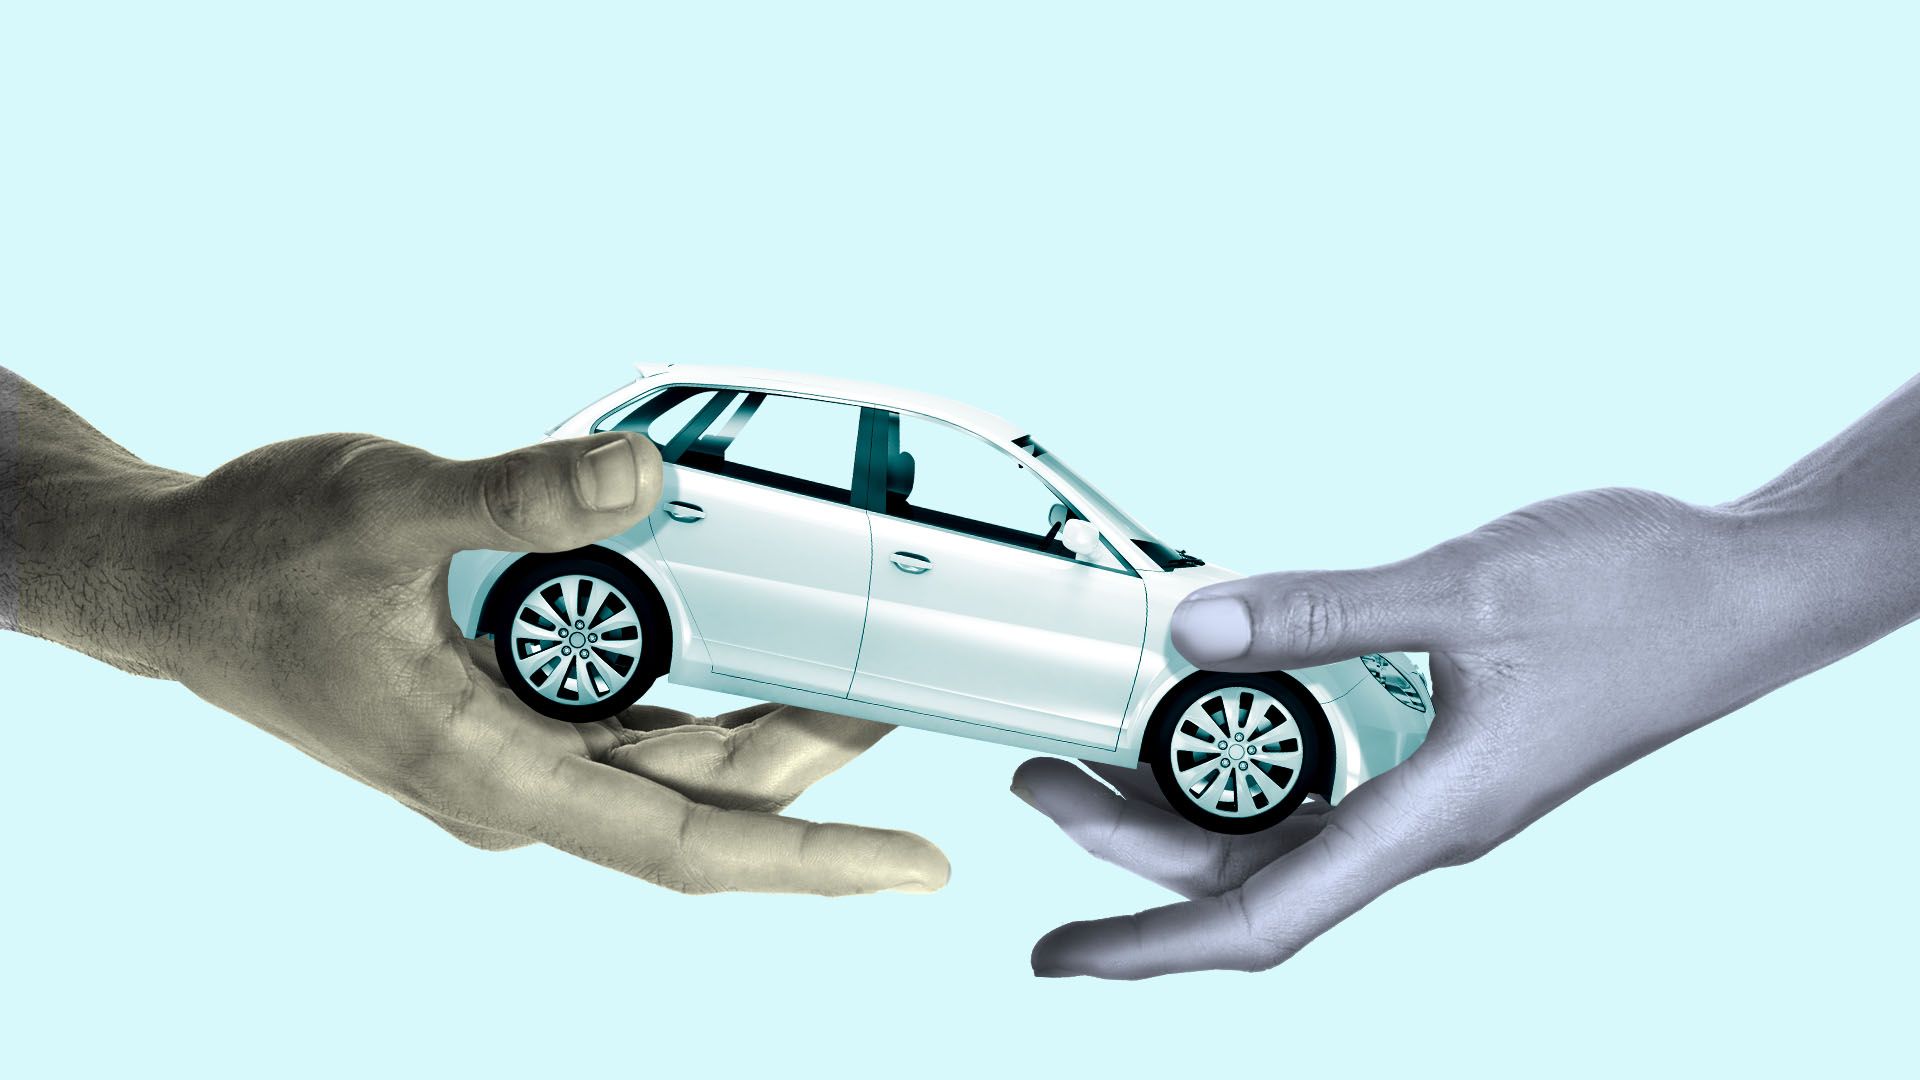 In this illustration, two giant hands hold a miniature car. 